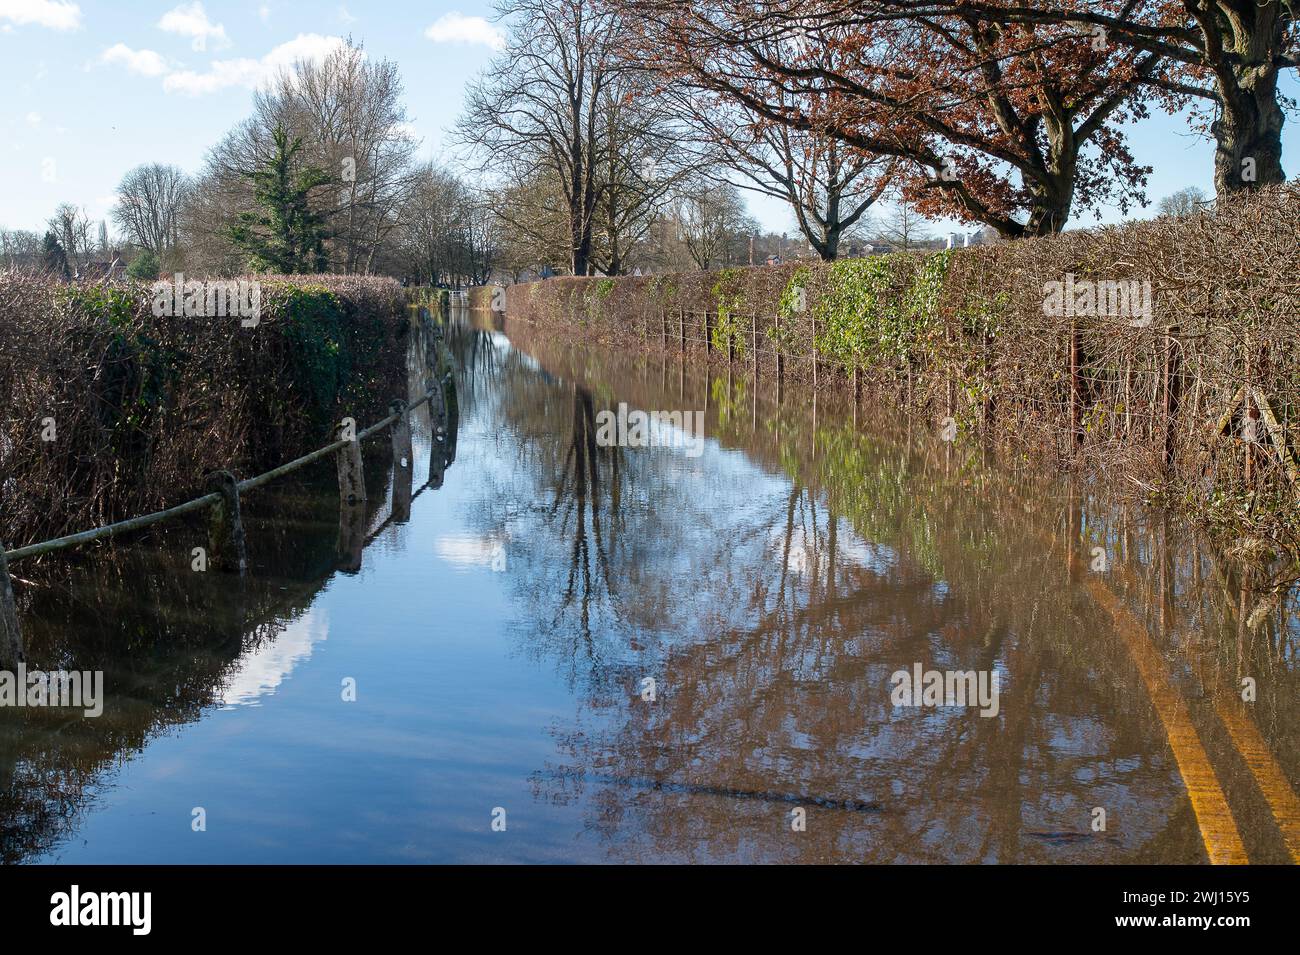 The road between Remenham and Henley is closed due to flooding. The River Thames has burst its banks at Henley on Thames in Oxfordshire. A Flood Warning is in place for the River Thames for Henley, Remenham and Medmenham. Property flooding is expected and river levels are expected to continue to rise Stock Photo